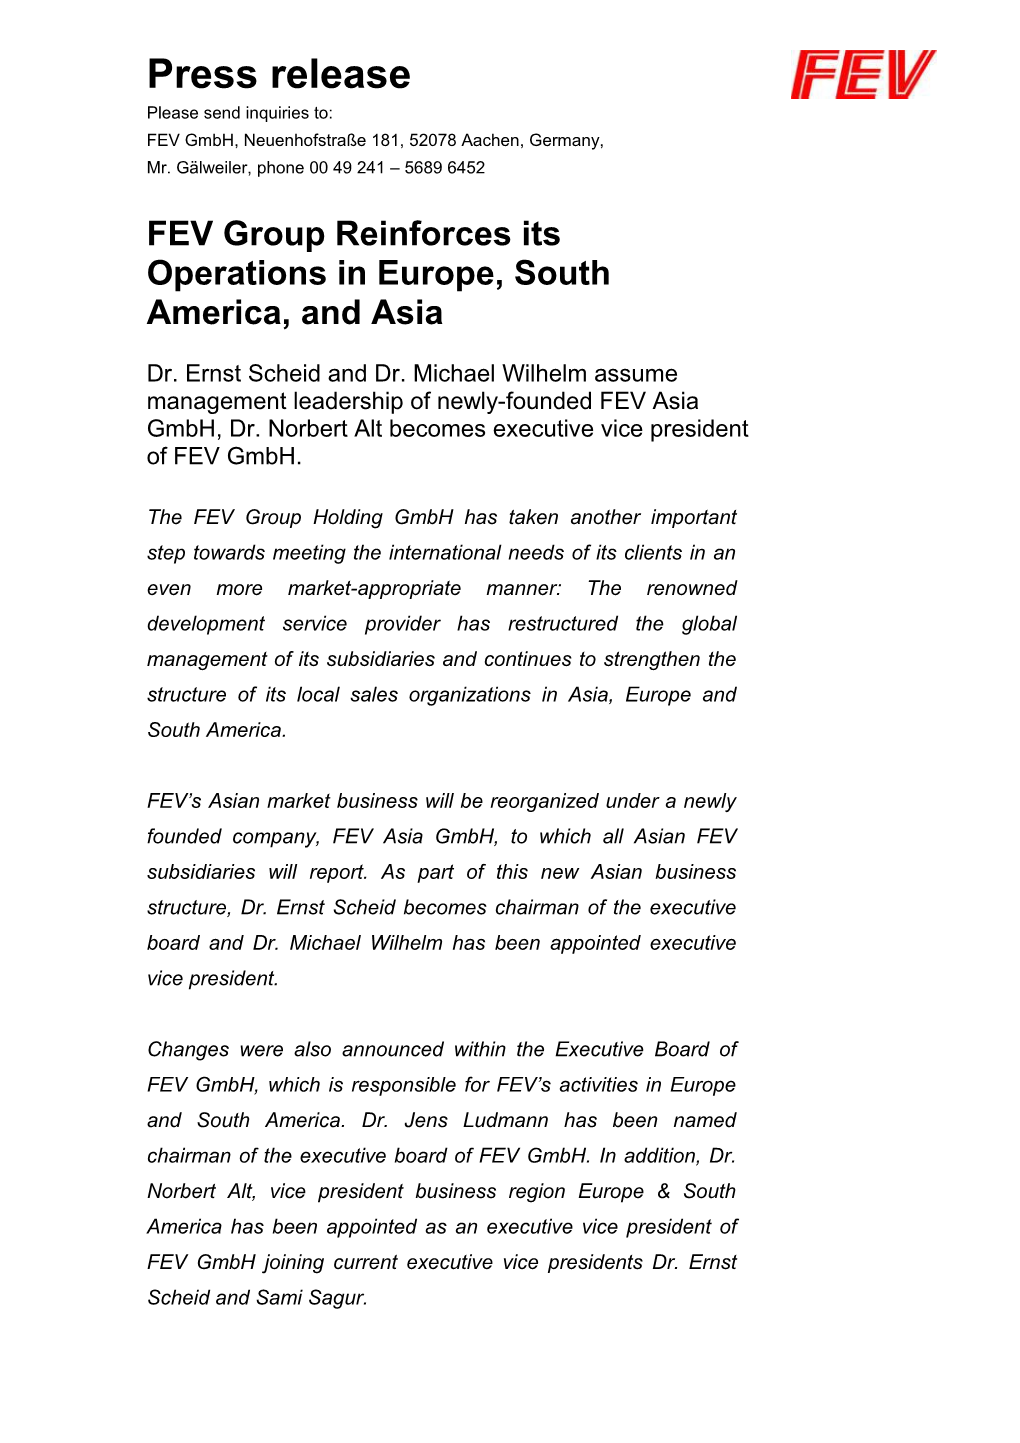 FEV Group Reinforces Its Operations in Europe, South America, and Asia